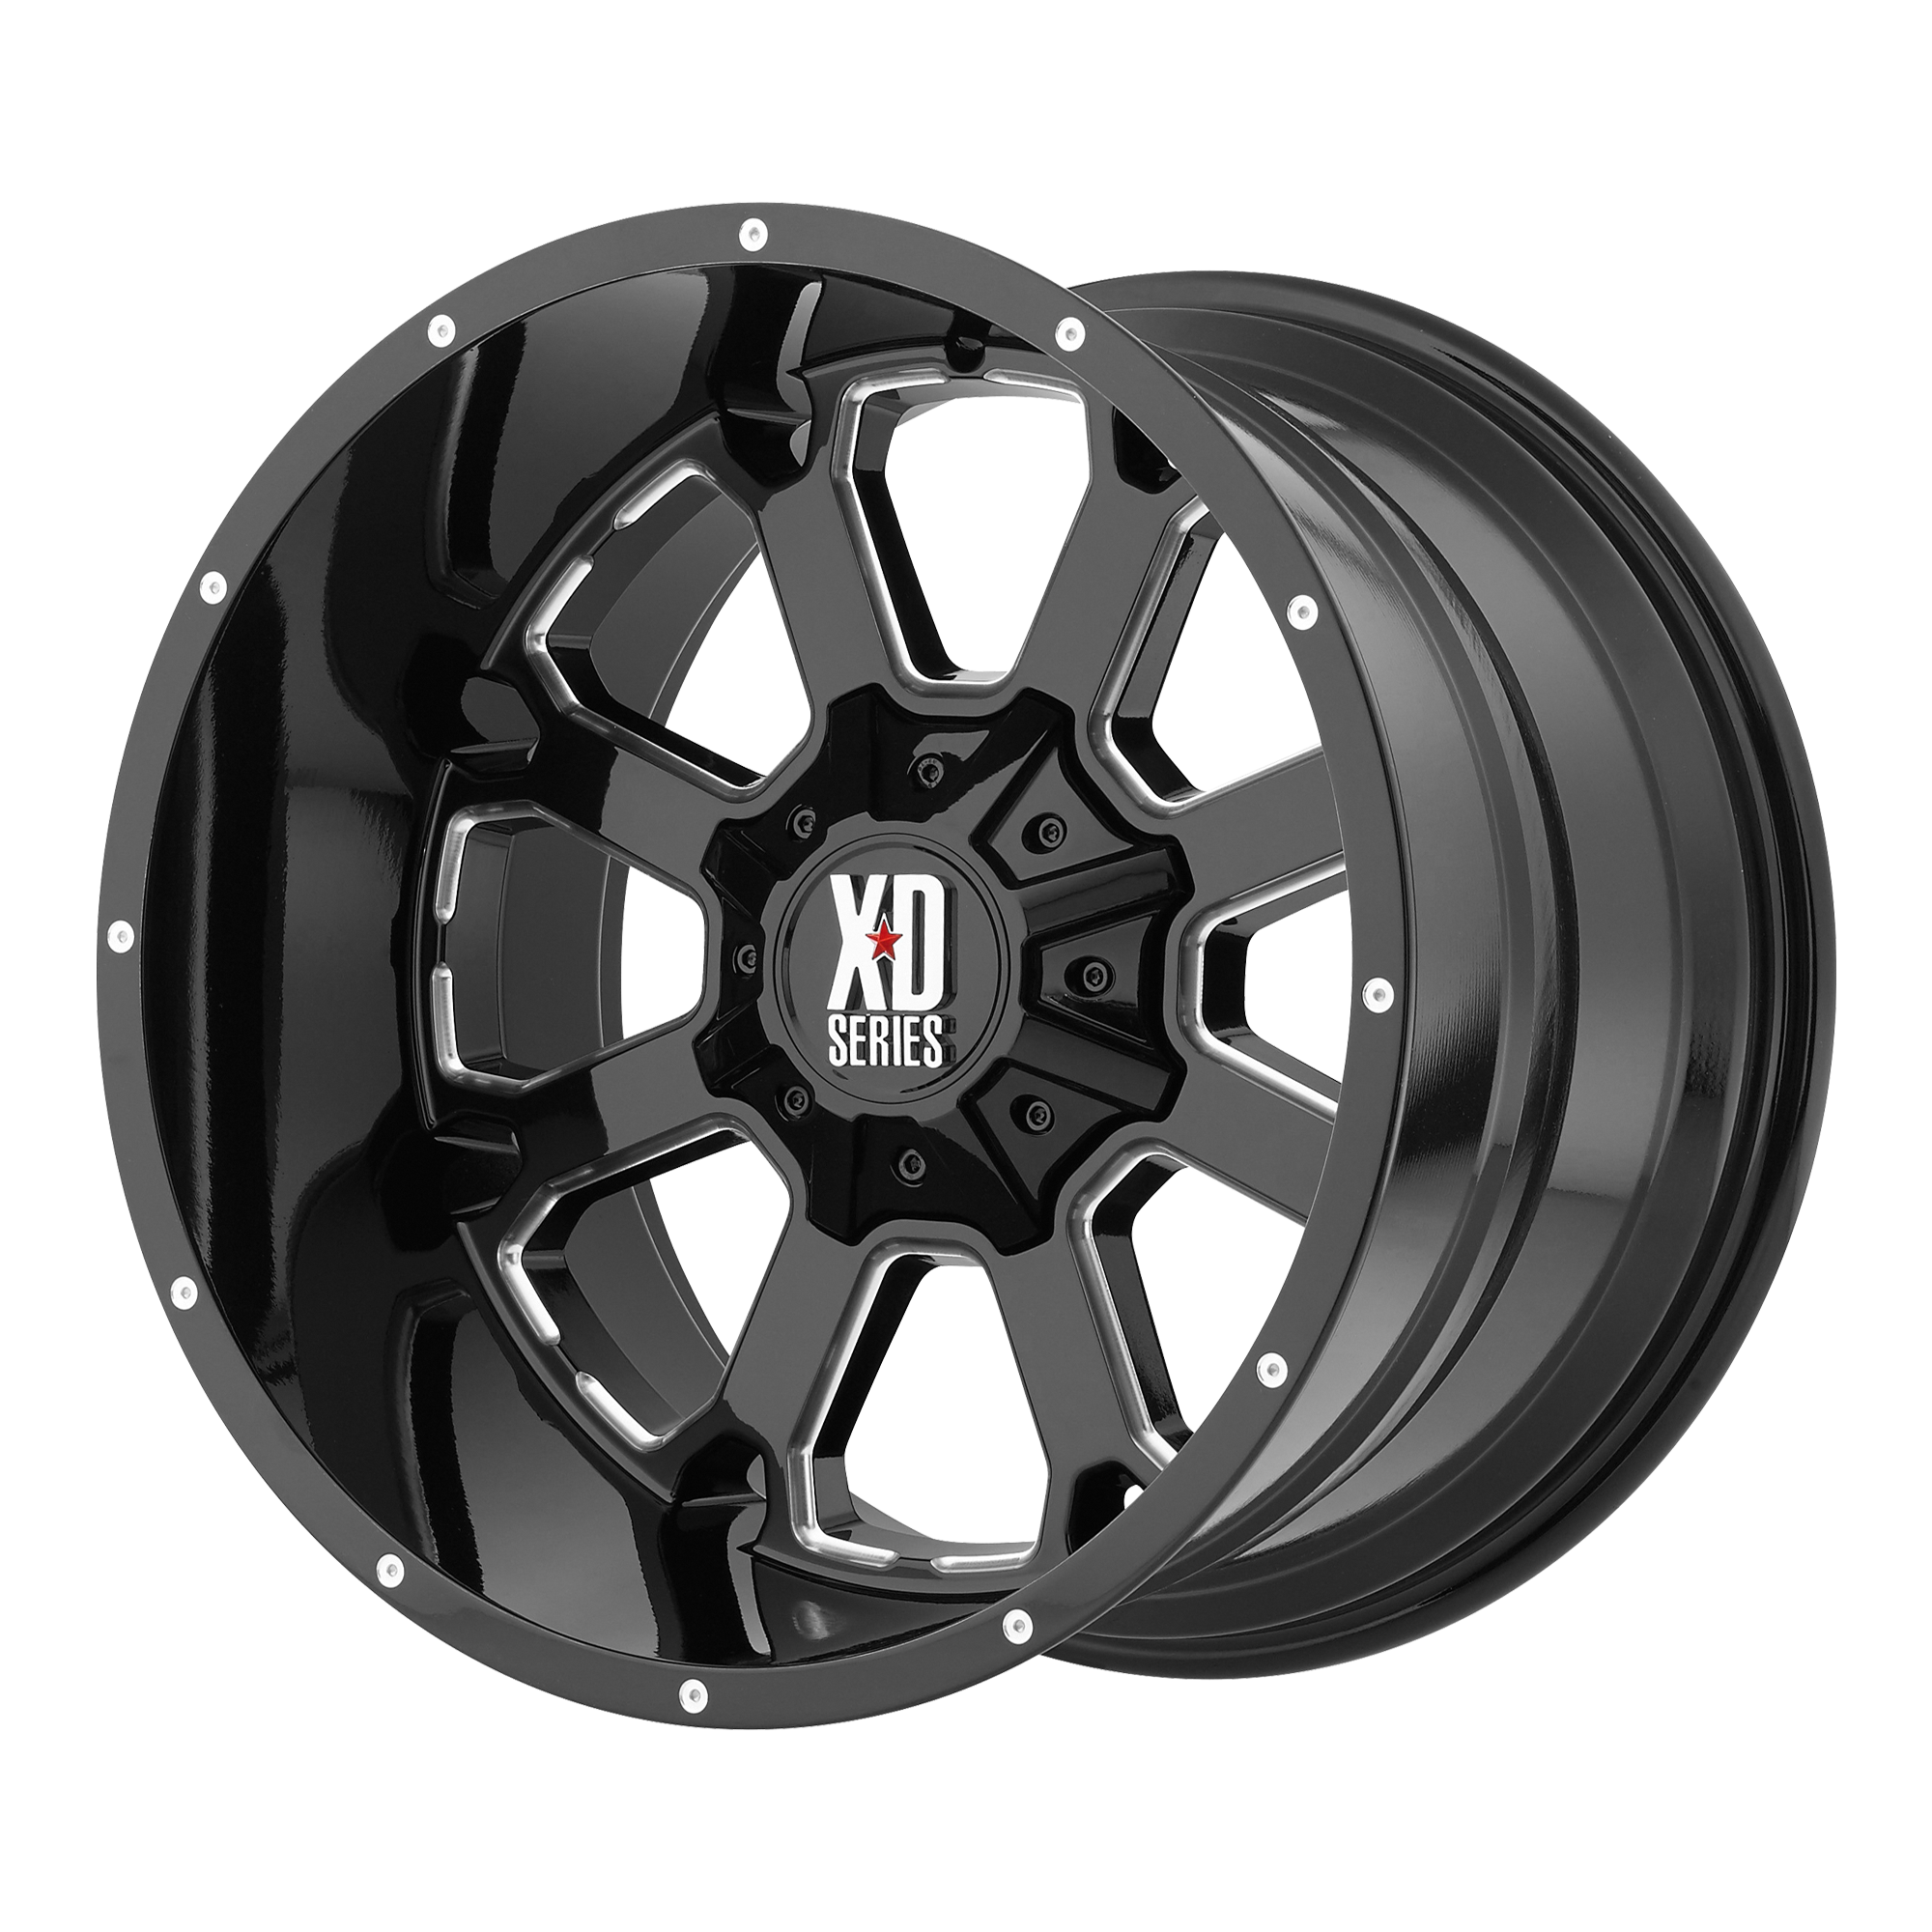 BUCK 25 20x9 5x150.00 GLOSS BLACK MILLED (25 mm) - Tires and Engine Performance